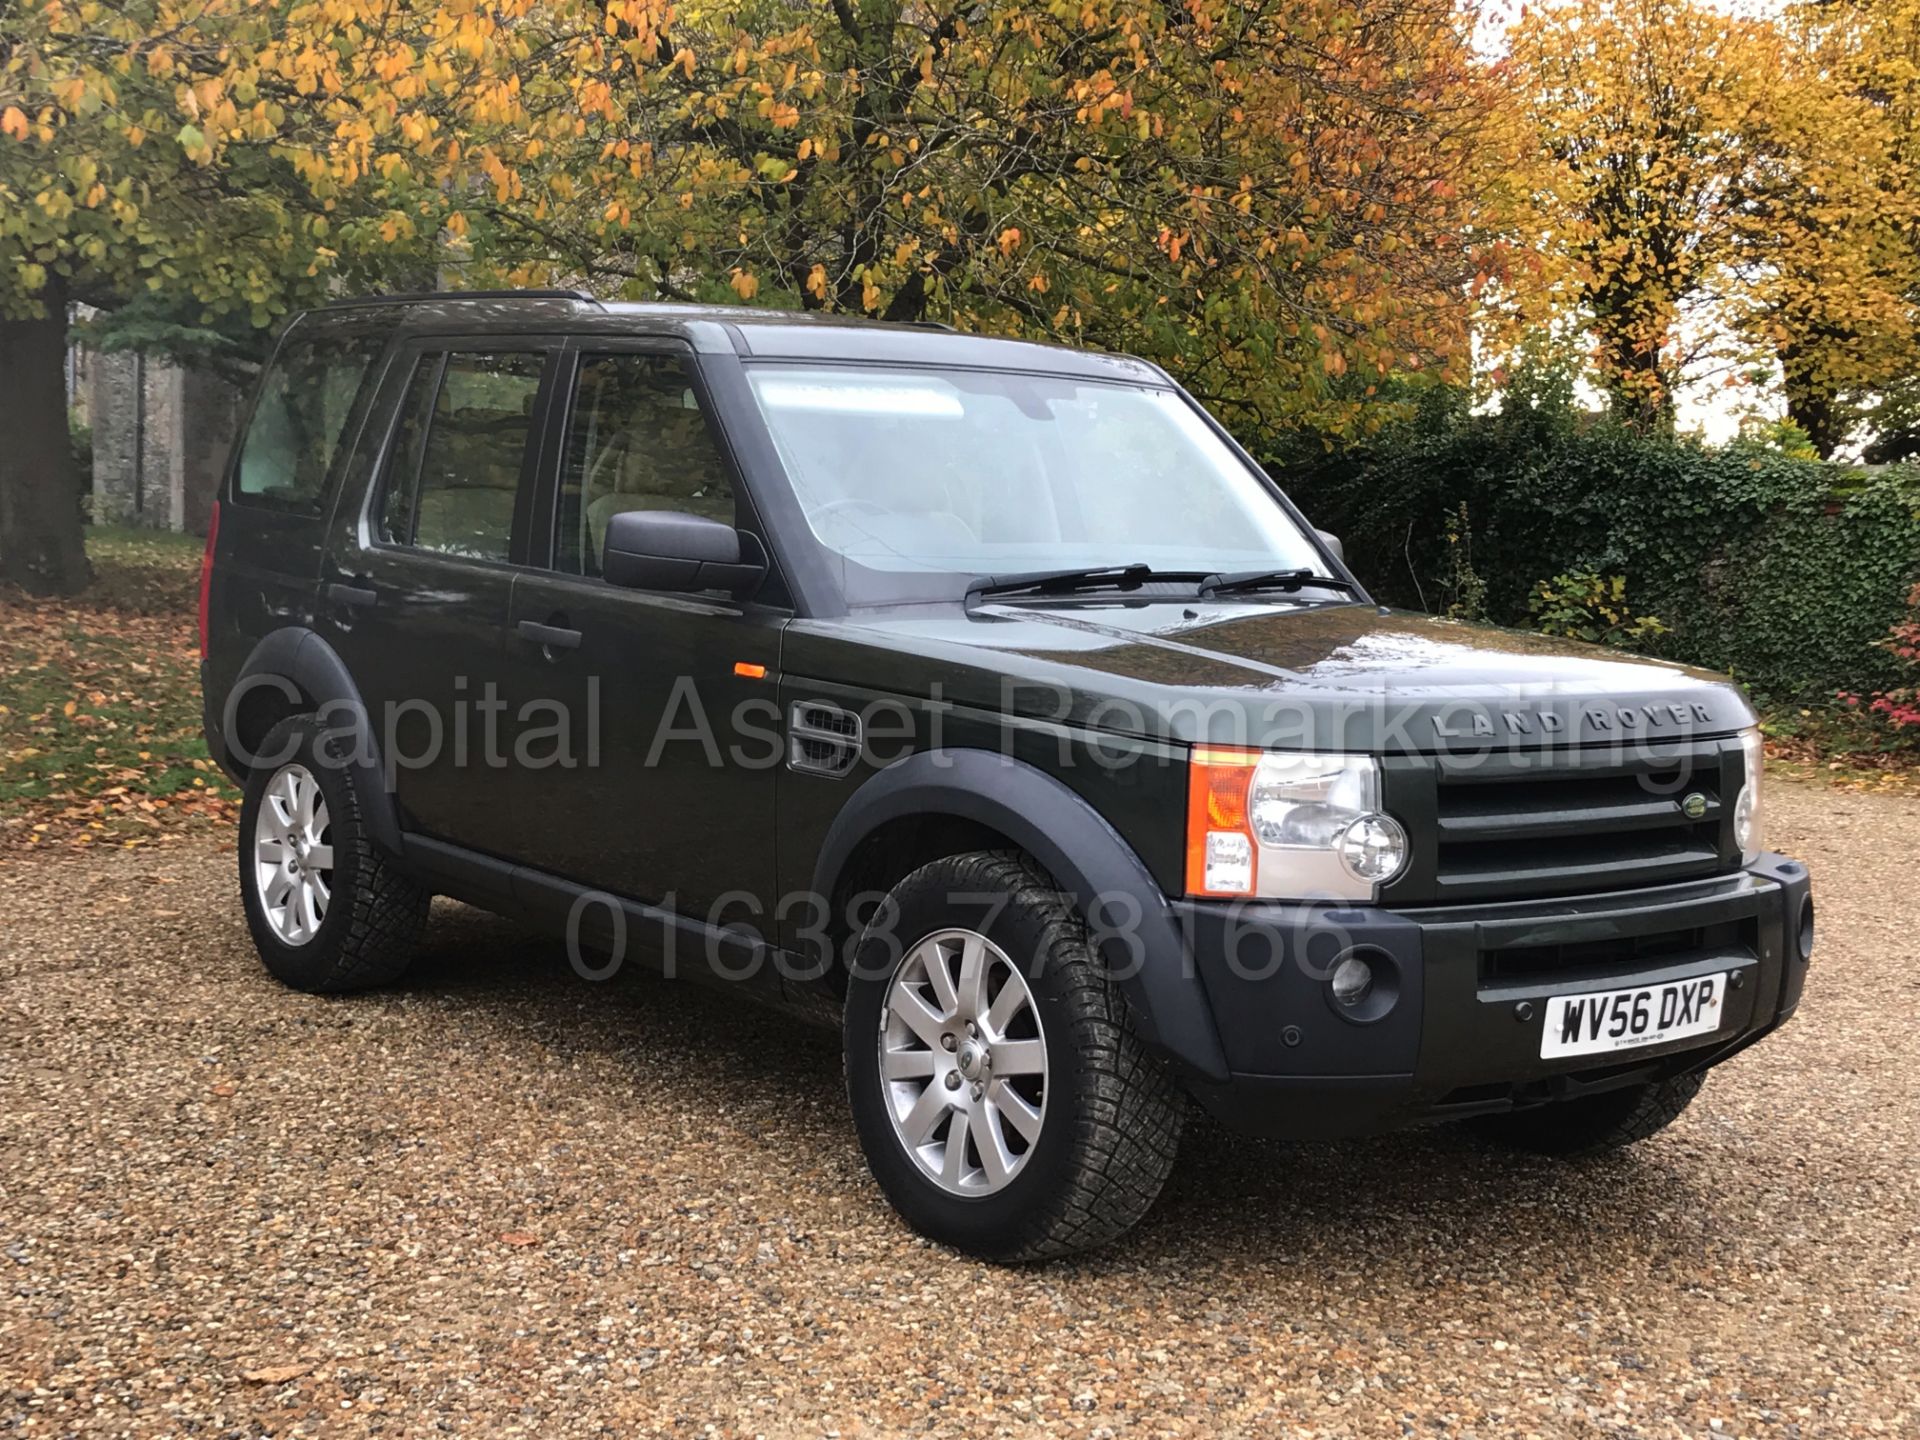 LAND ROVER DISCOVERY 3 SE (2007 MODEL) 'TDV6 - AUTO - LEATHER - SAT NAV - 7 SEATER' *MASSIVE SPEC* - Image 2 of 36